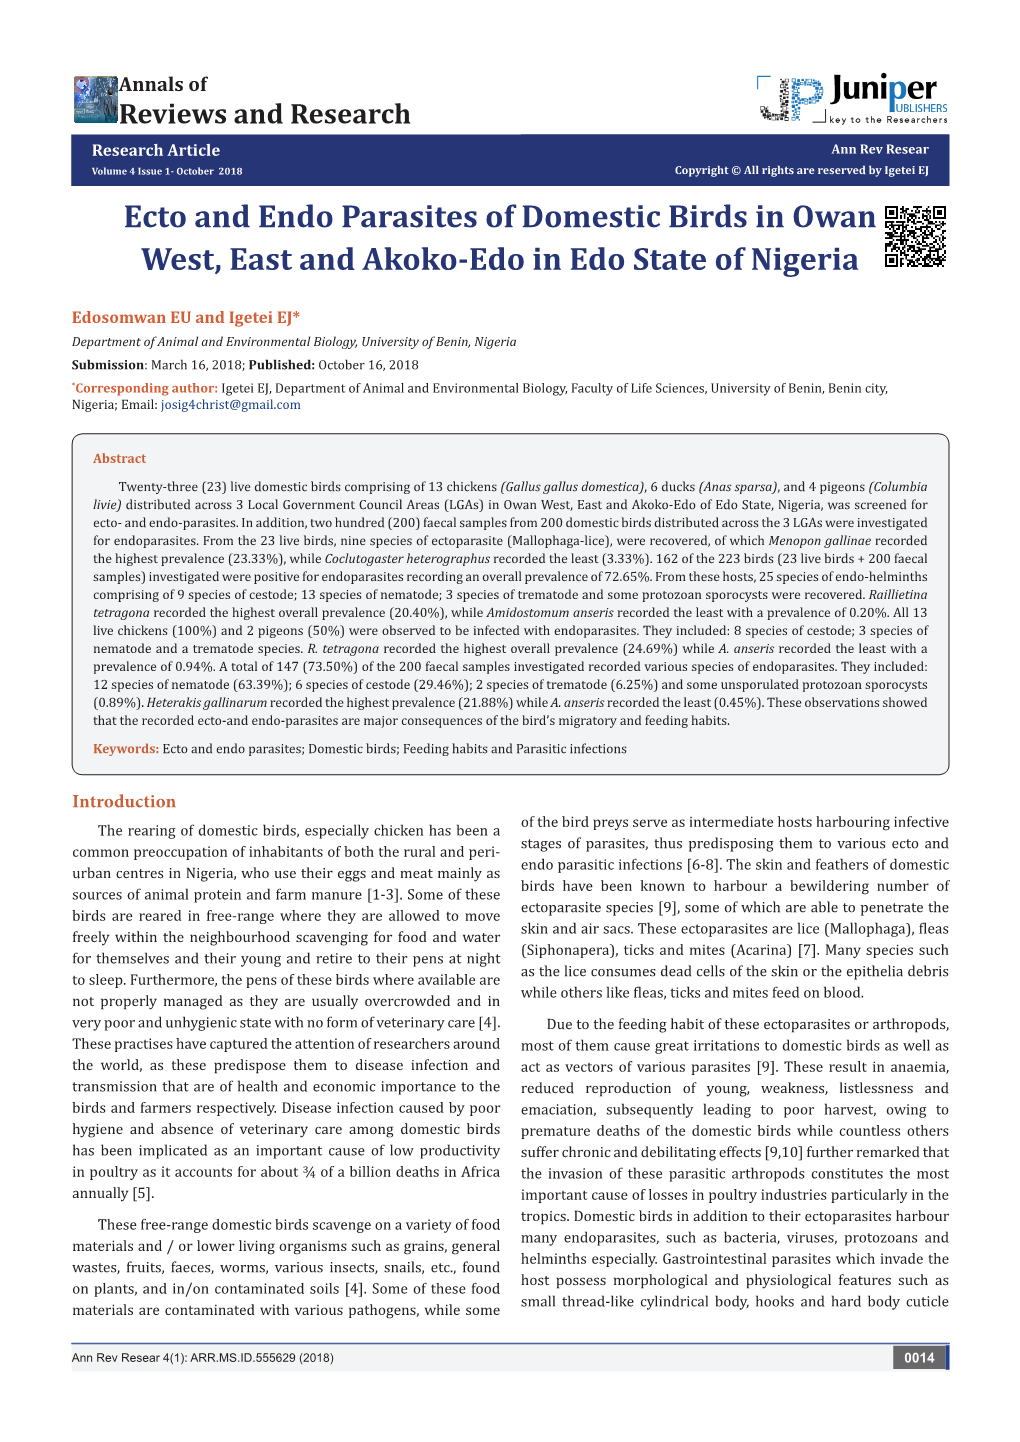 Ecto and Endo Parasites of Domestic Birds in Owan West, East and Akoko-Edo in Edo State of Nigeria